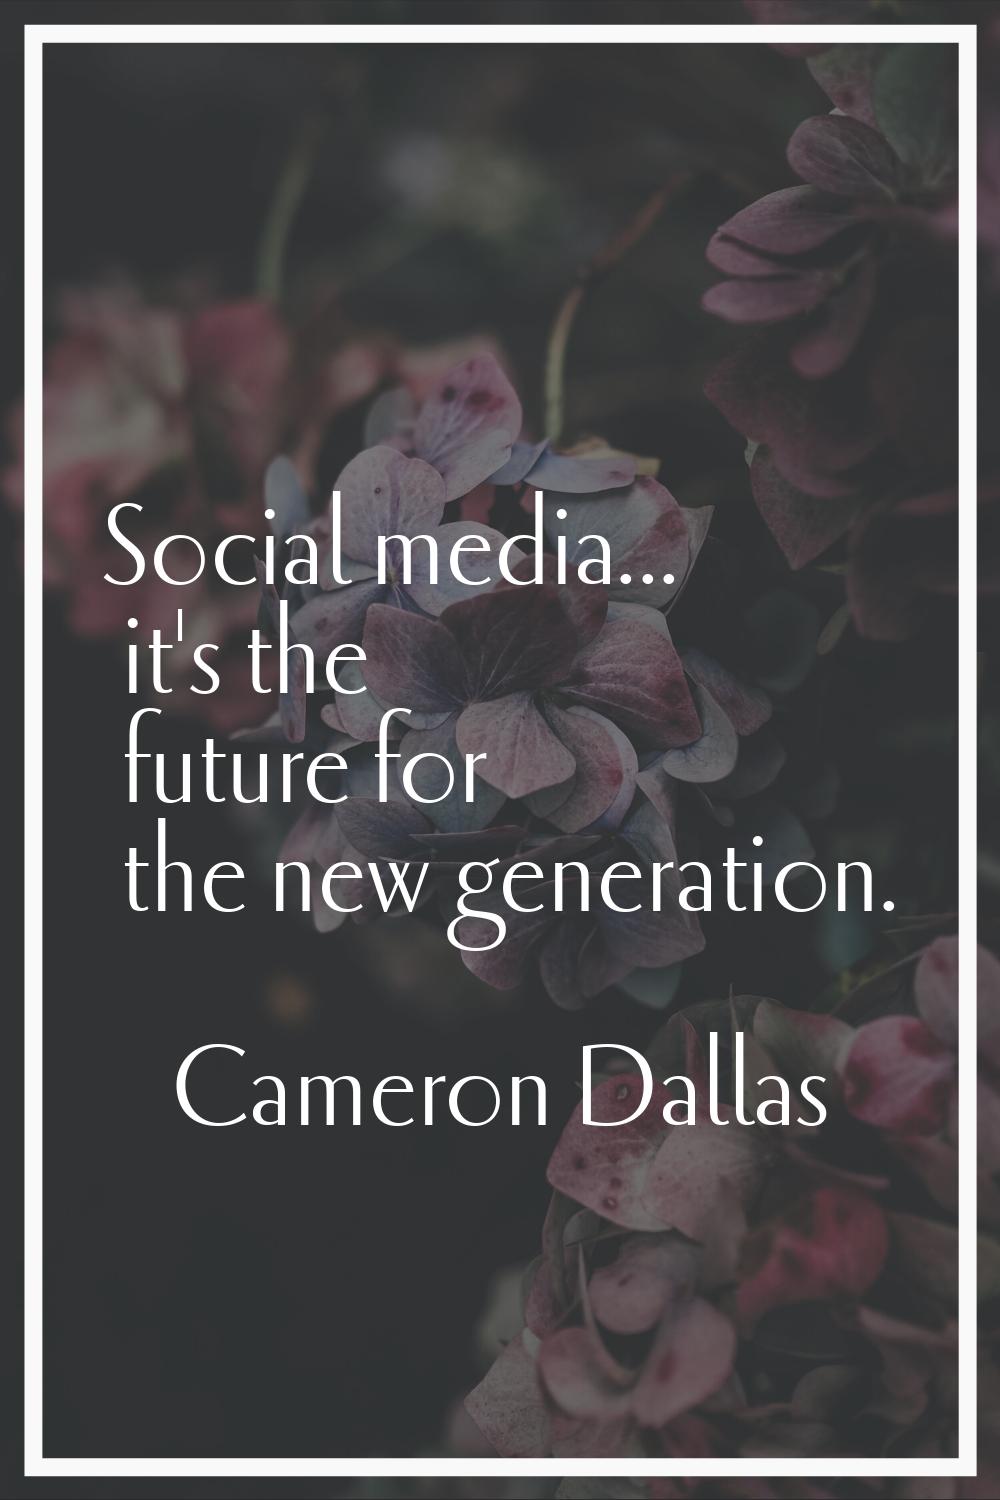 Social media... it's the future for the new generation.